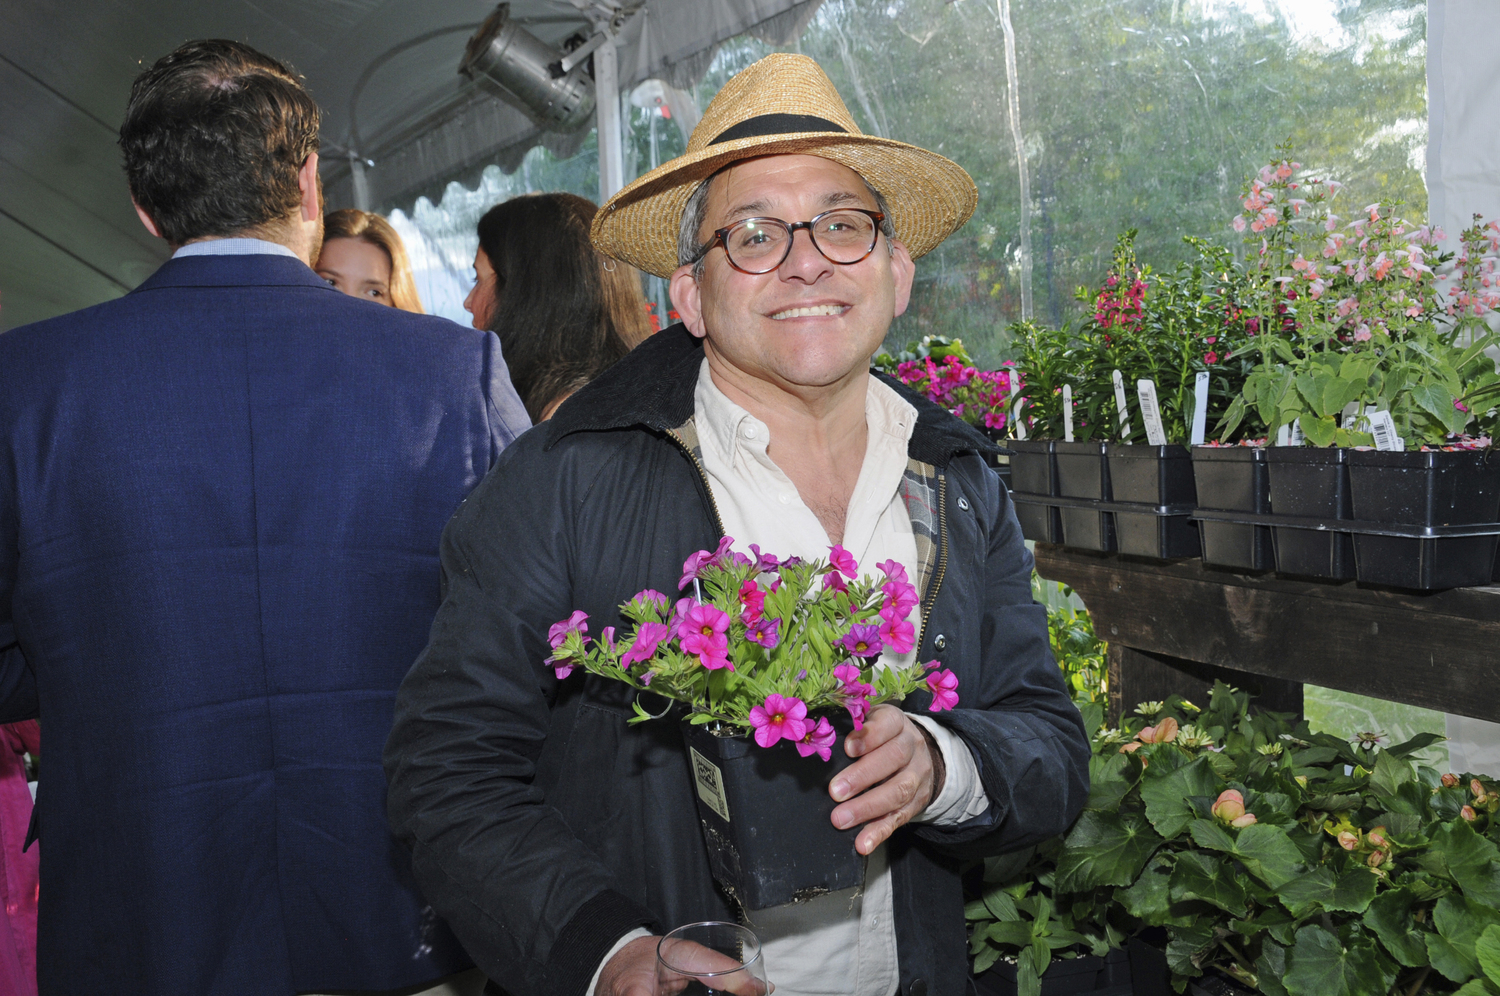 Alejandro Saralegui at the Garden Club of East Hampton's annual garden party and plant sale on the grounds of Mulford Farm in East Hampton on Friday evening. Plant lovers took home armloads and Flexible Flyers full of their favorites and bid for silent auction items. A special 